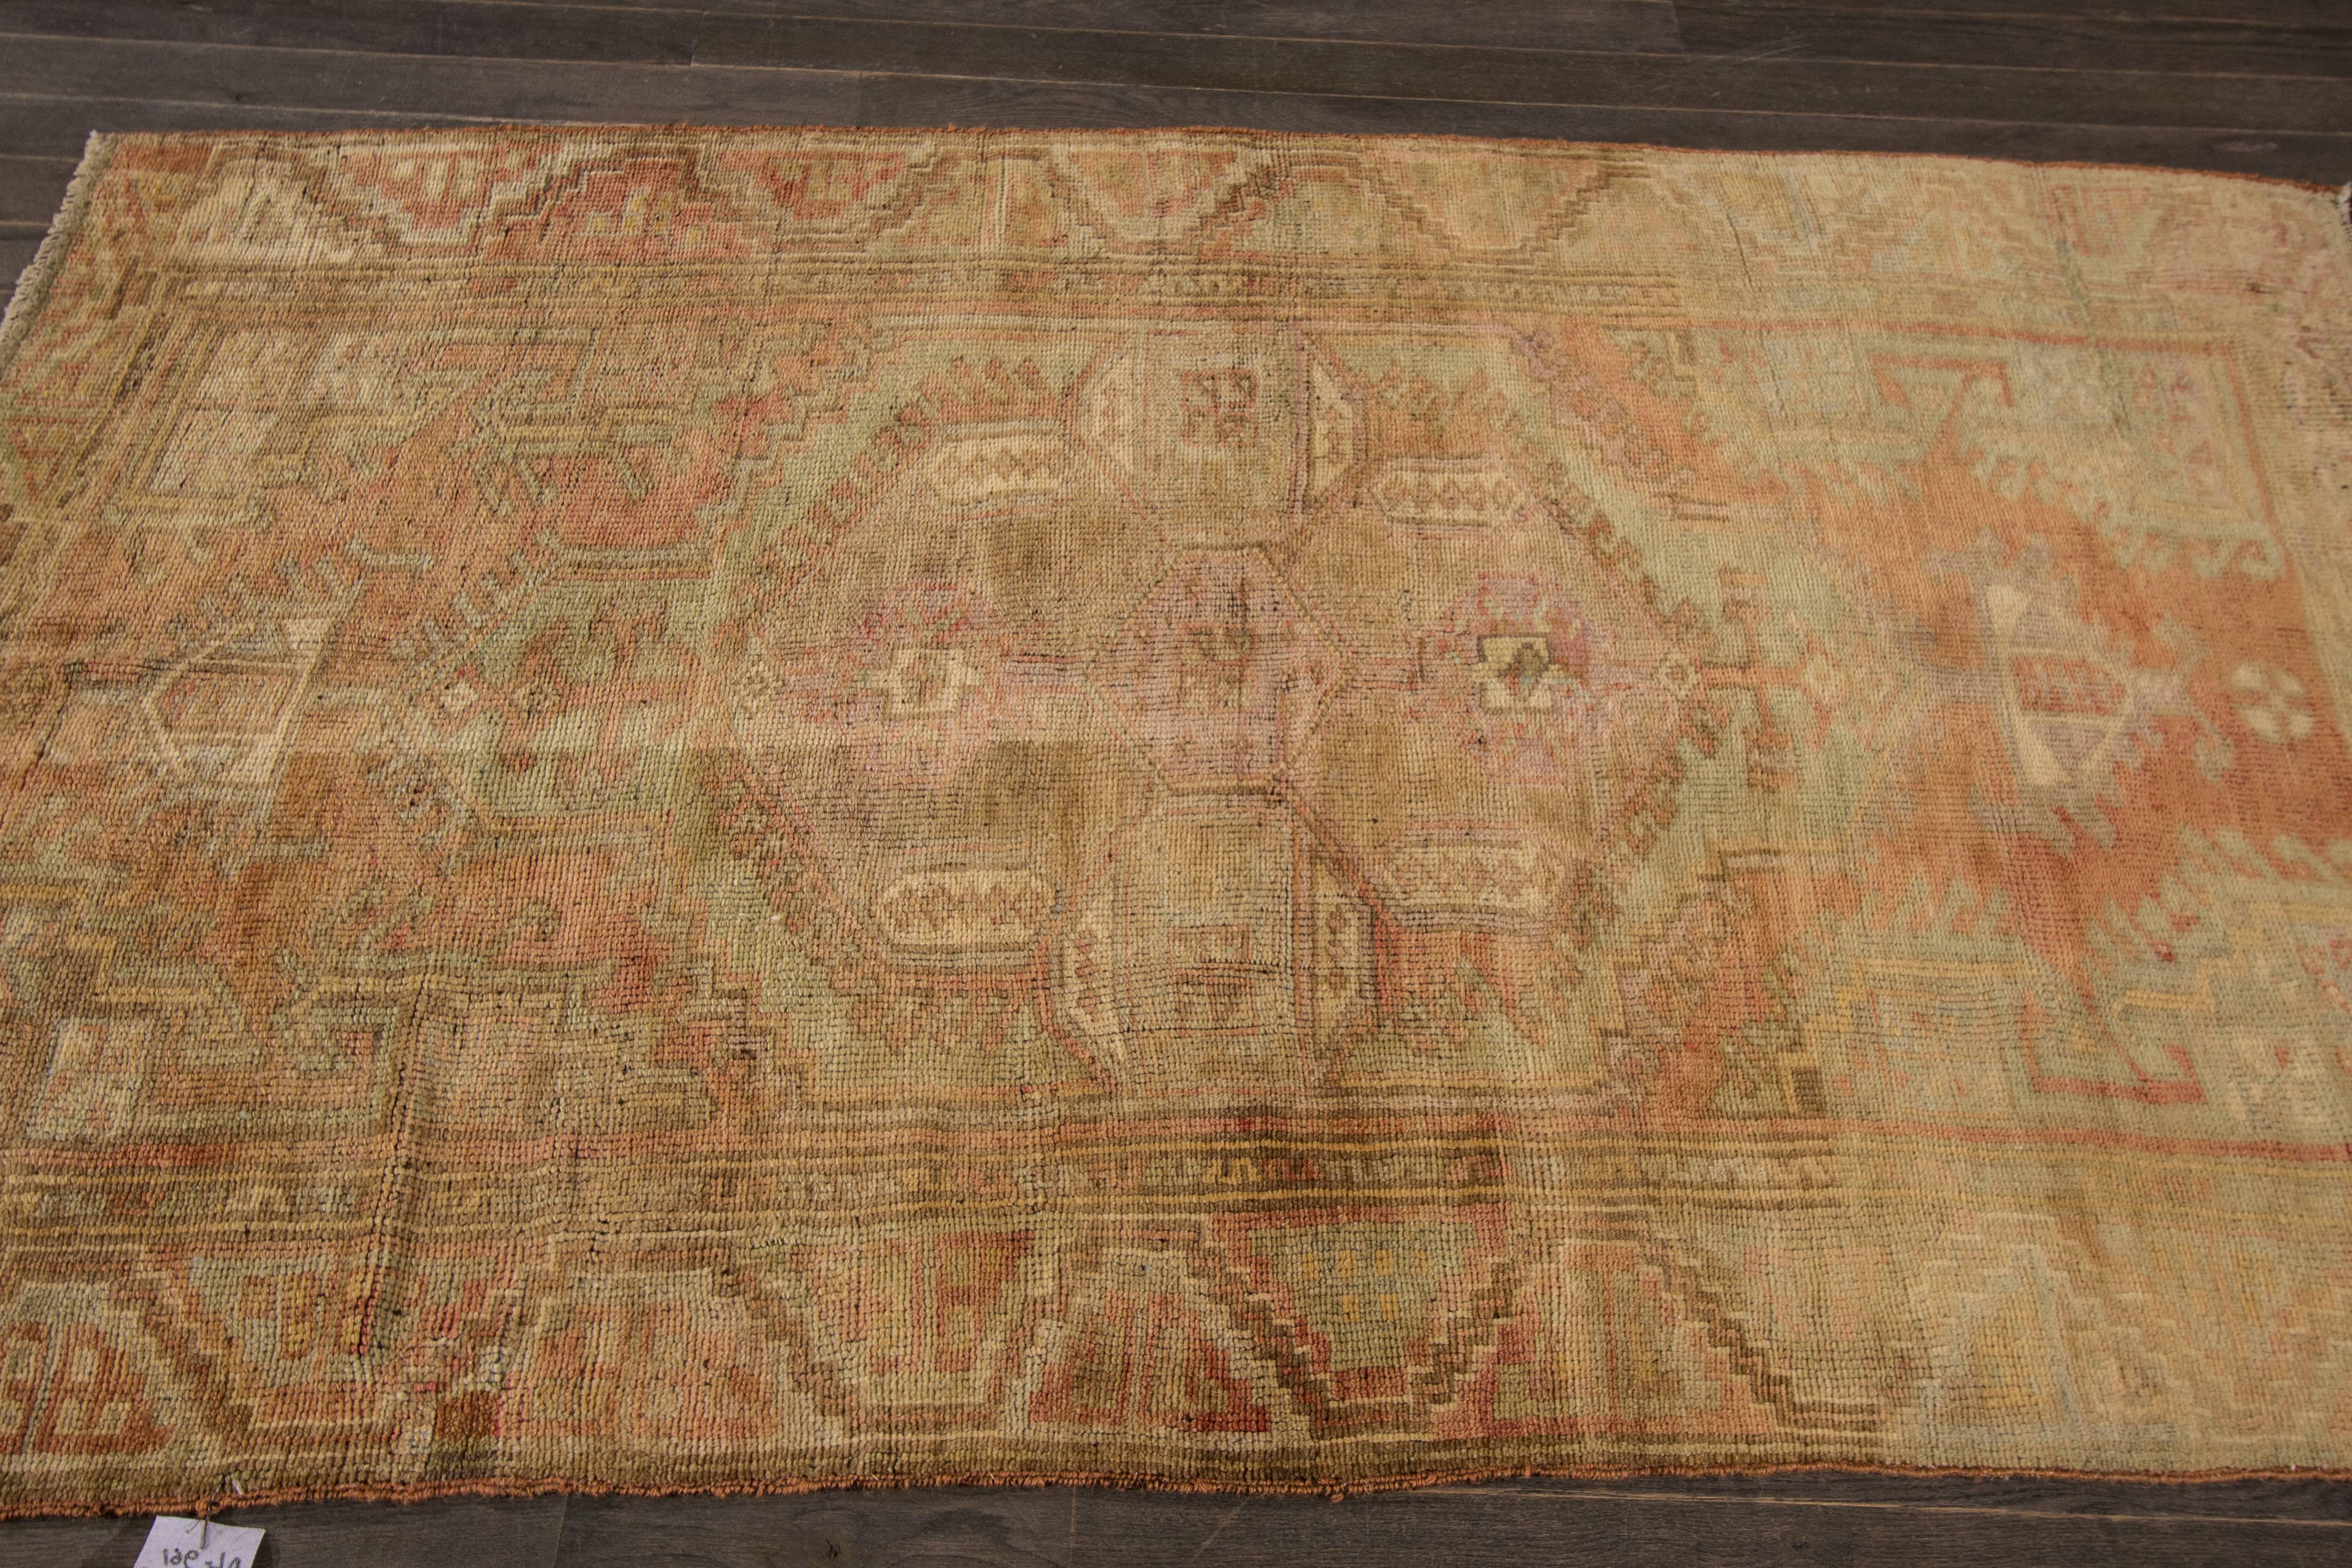 This beautiful vintage Turkish Anatolian hand-knotted design rug will make your floor look splendid. This collection is made in wool. It's measures are: 3'.10 x 6'.2
This vintage Turkish Anatolian rug was made in Turkey.